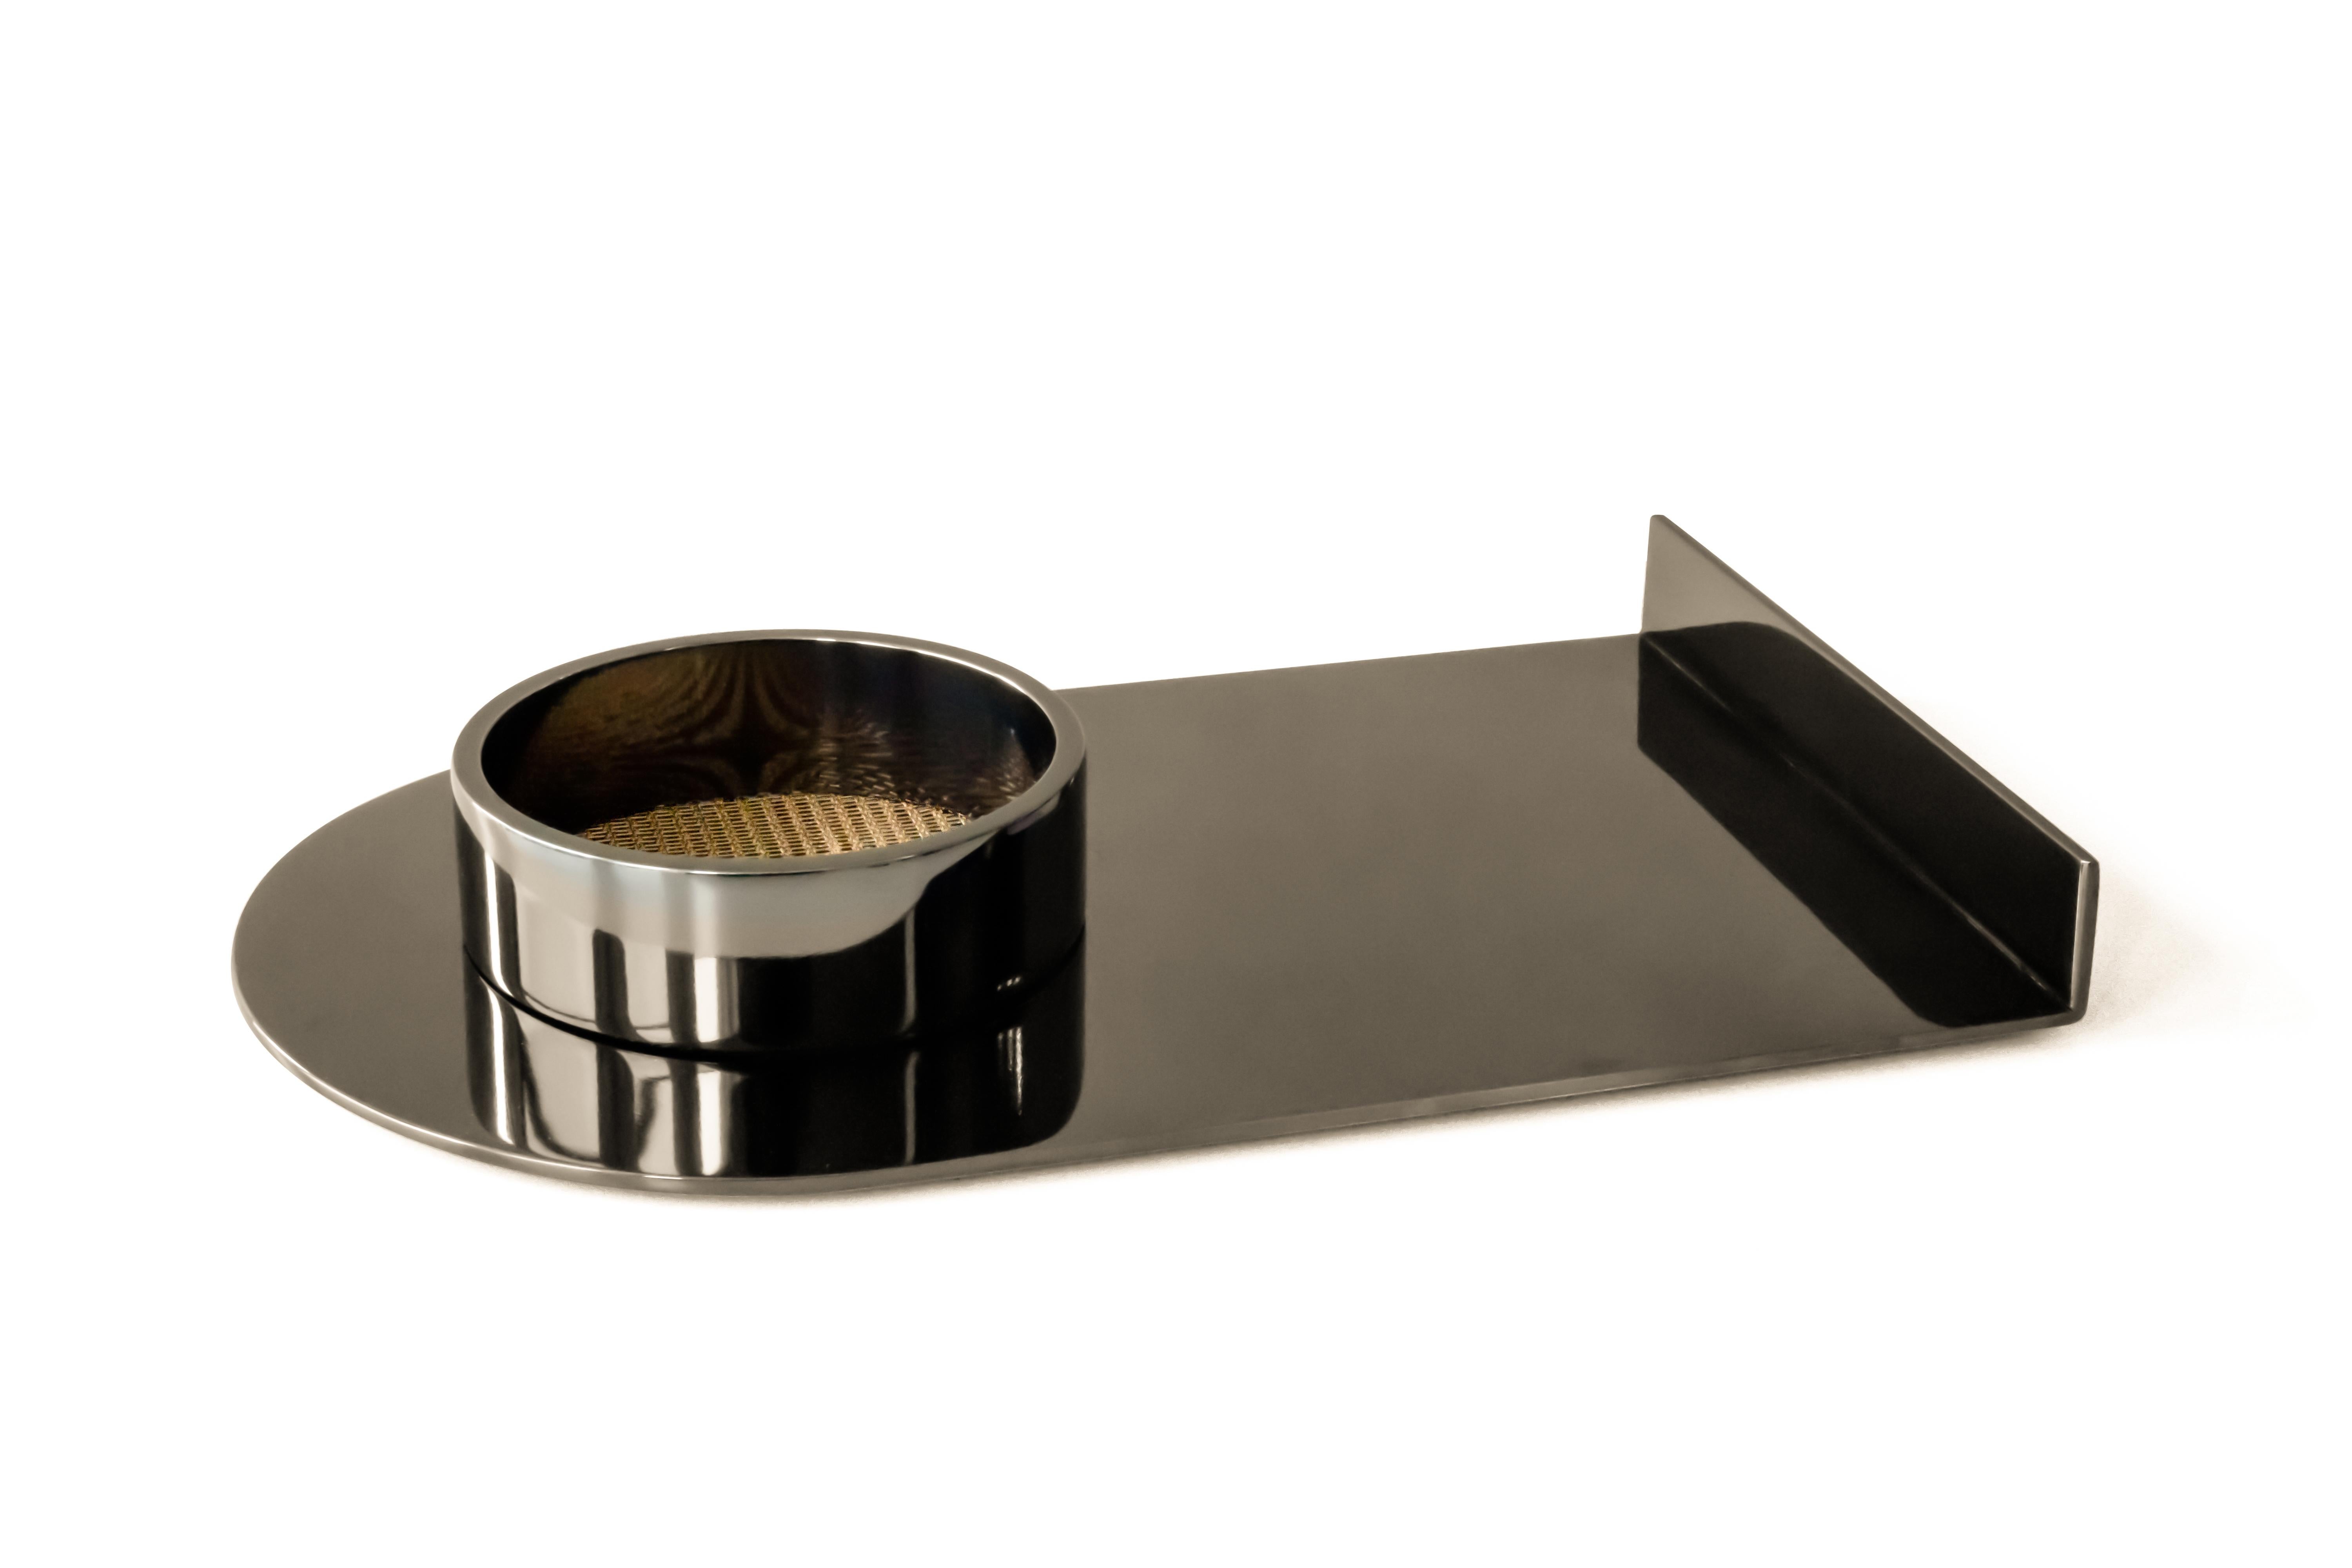 ZERO Black Nickel and Bronze Valet Tray by OA In New Condition For Sale In Vero Beach, FL